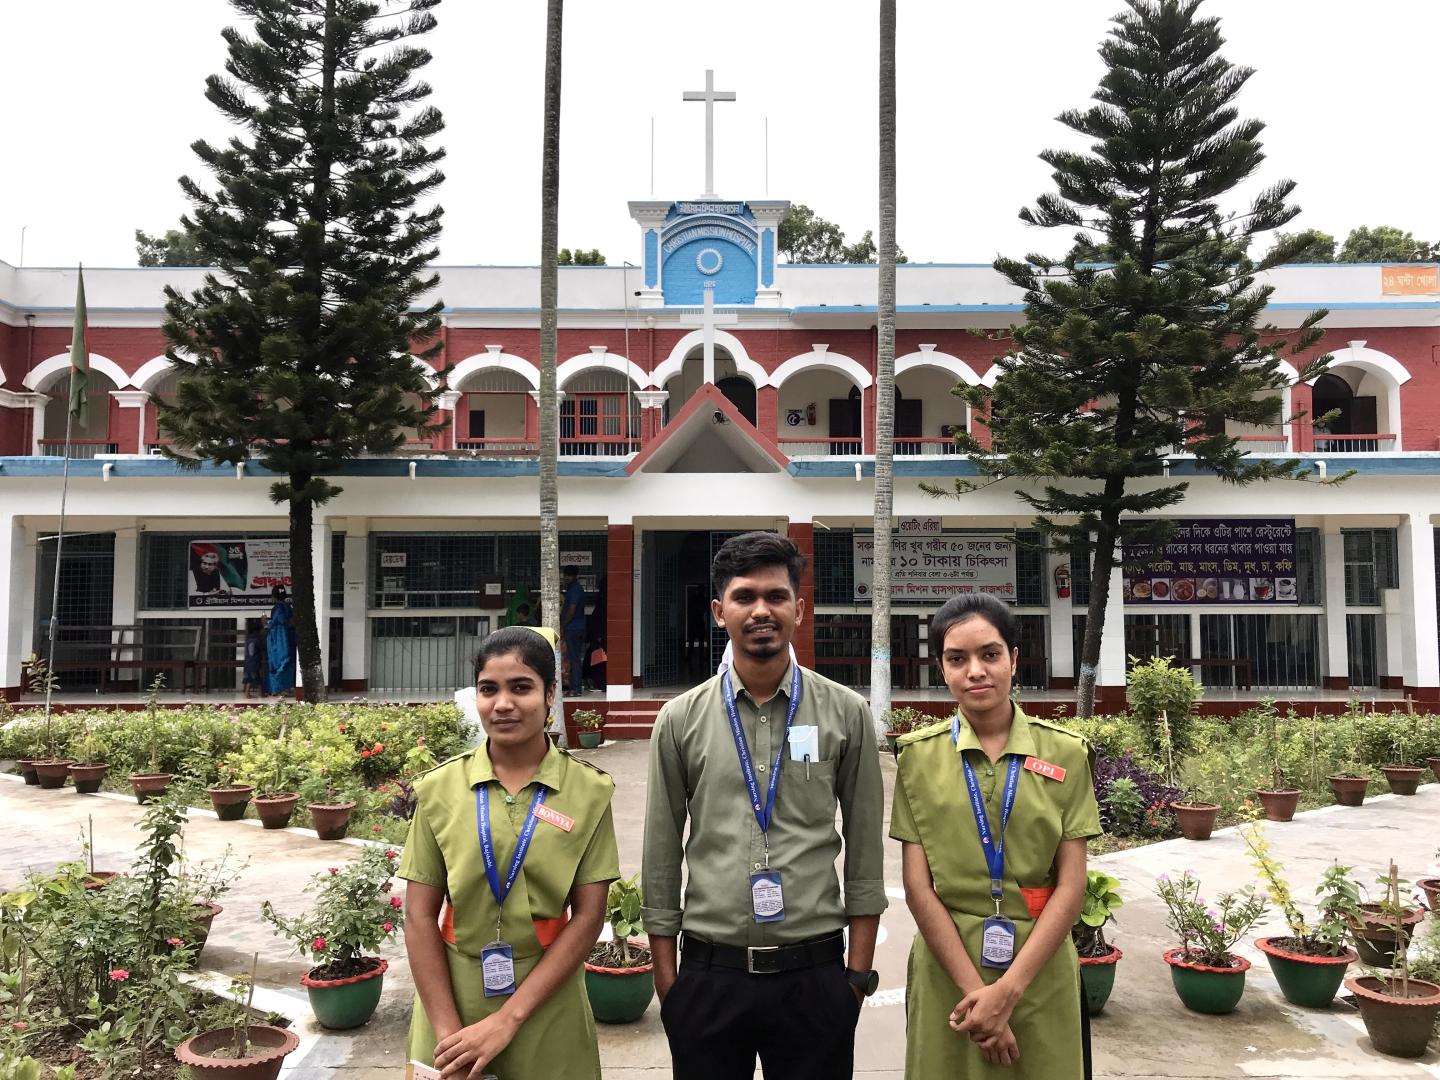 Three nursing students stand in front of a red building